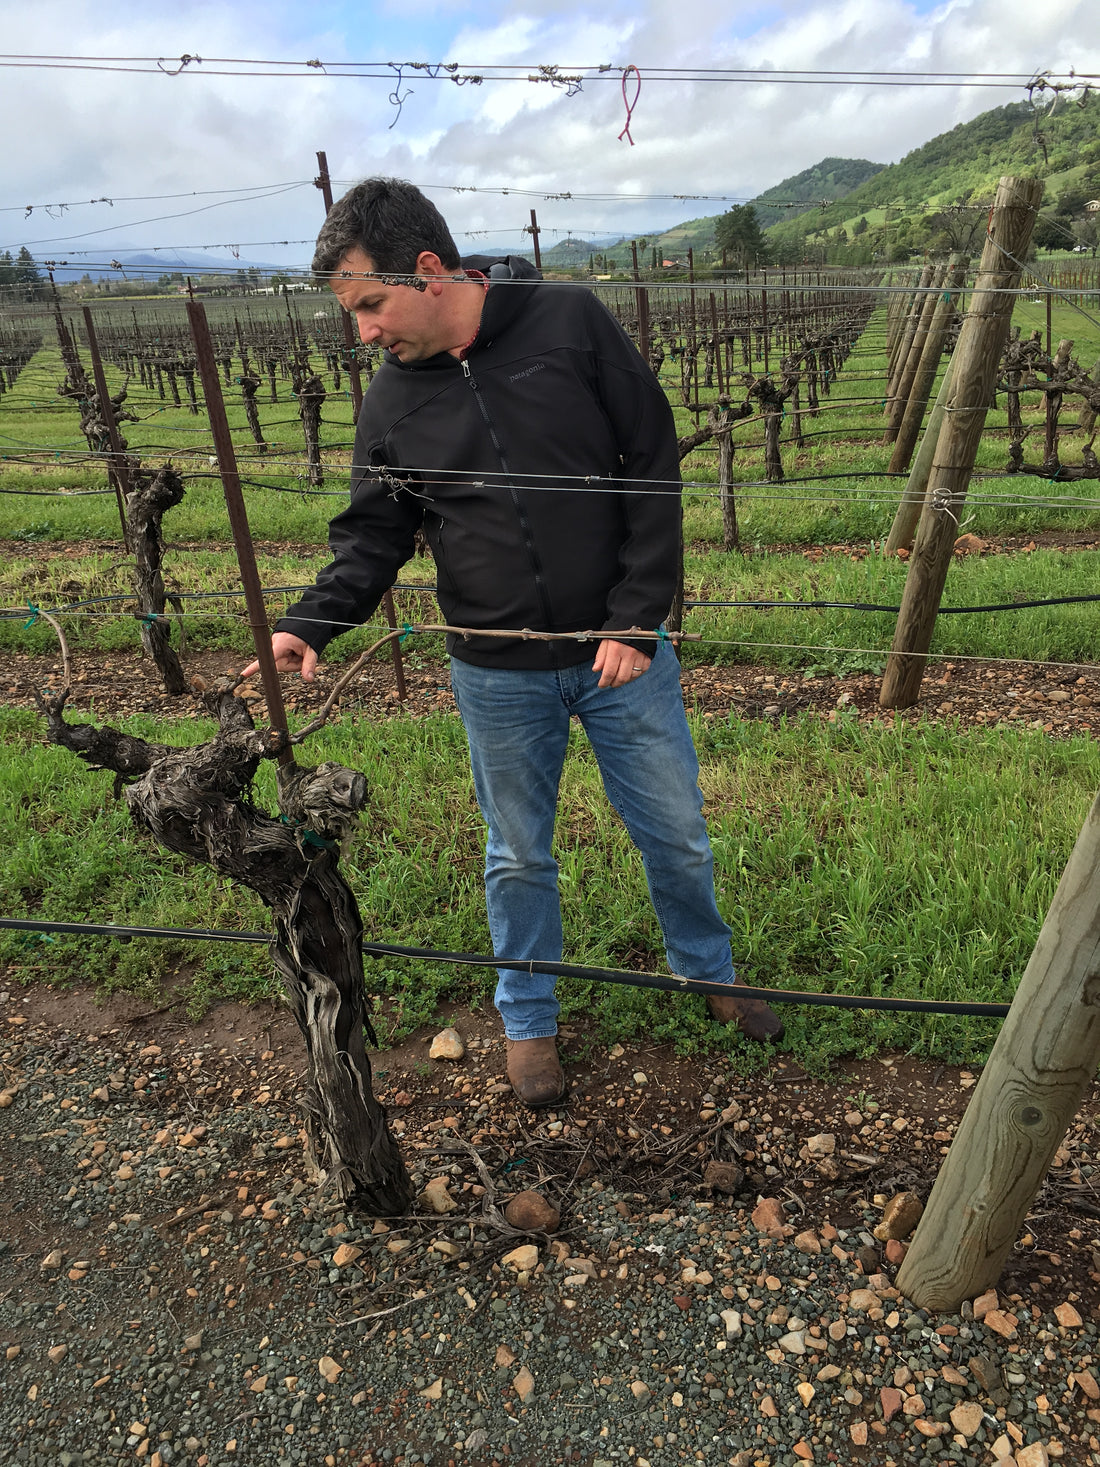 What Do Winemakers Do During The Summer?